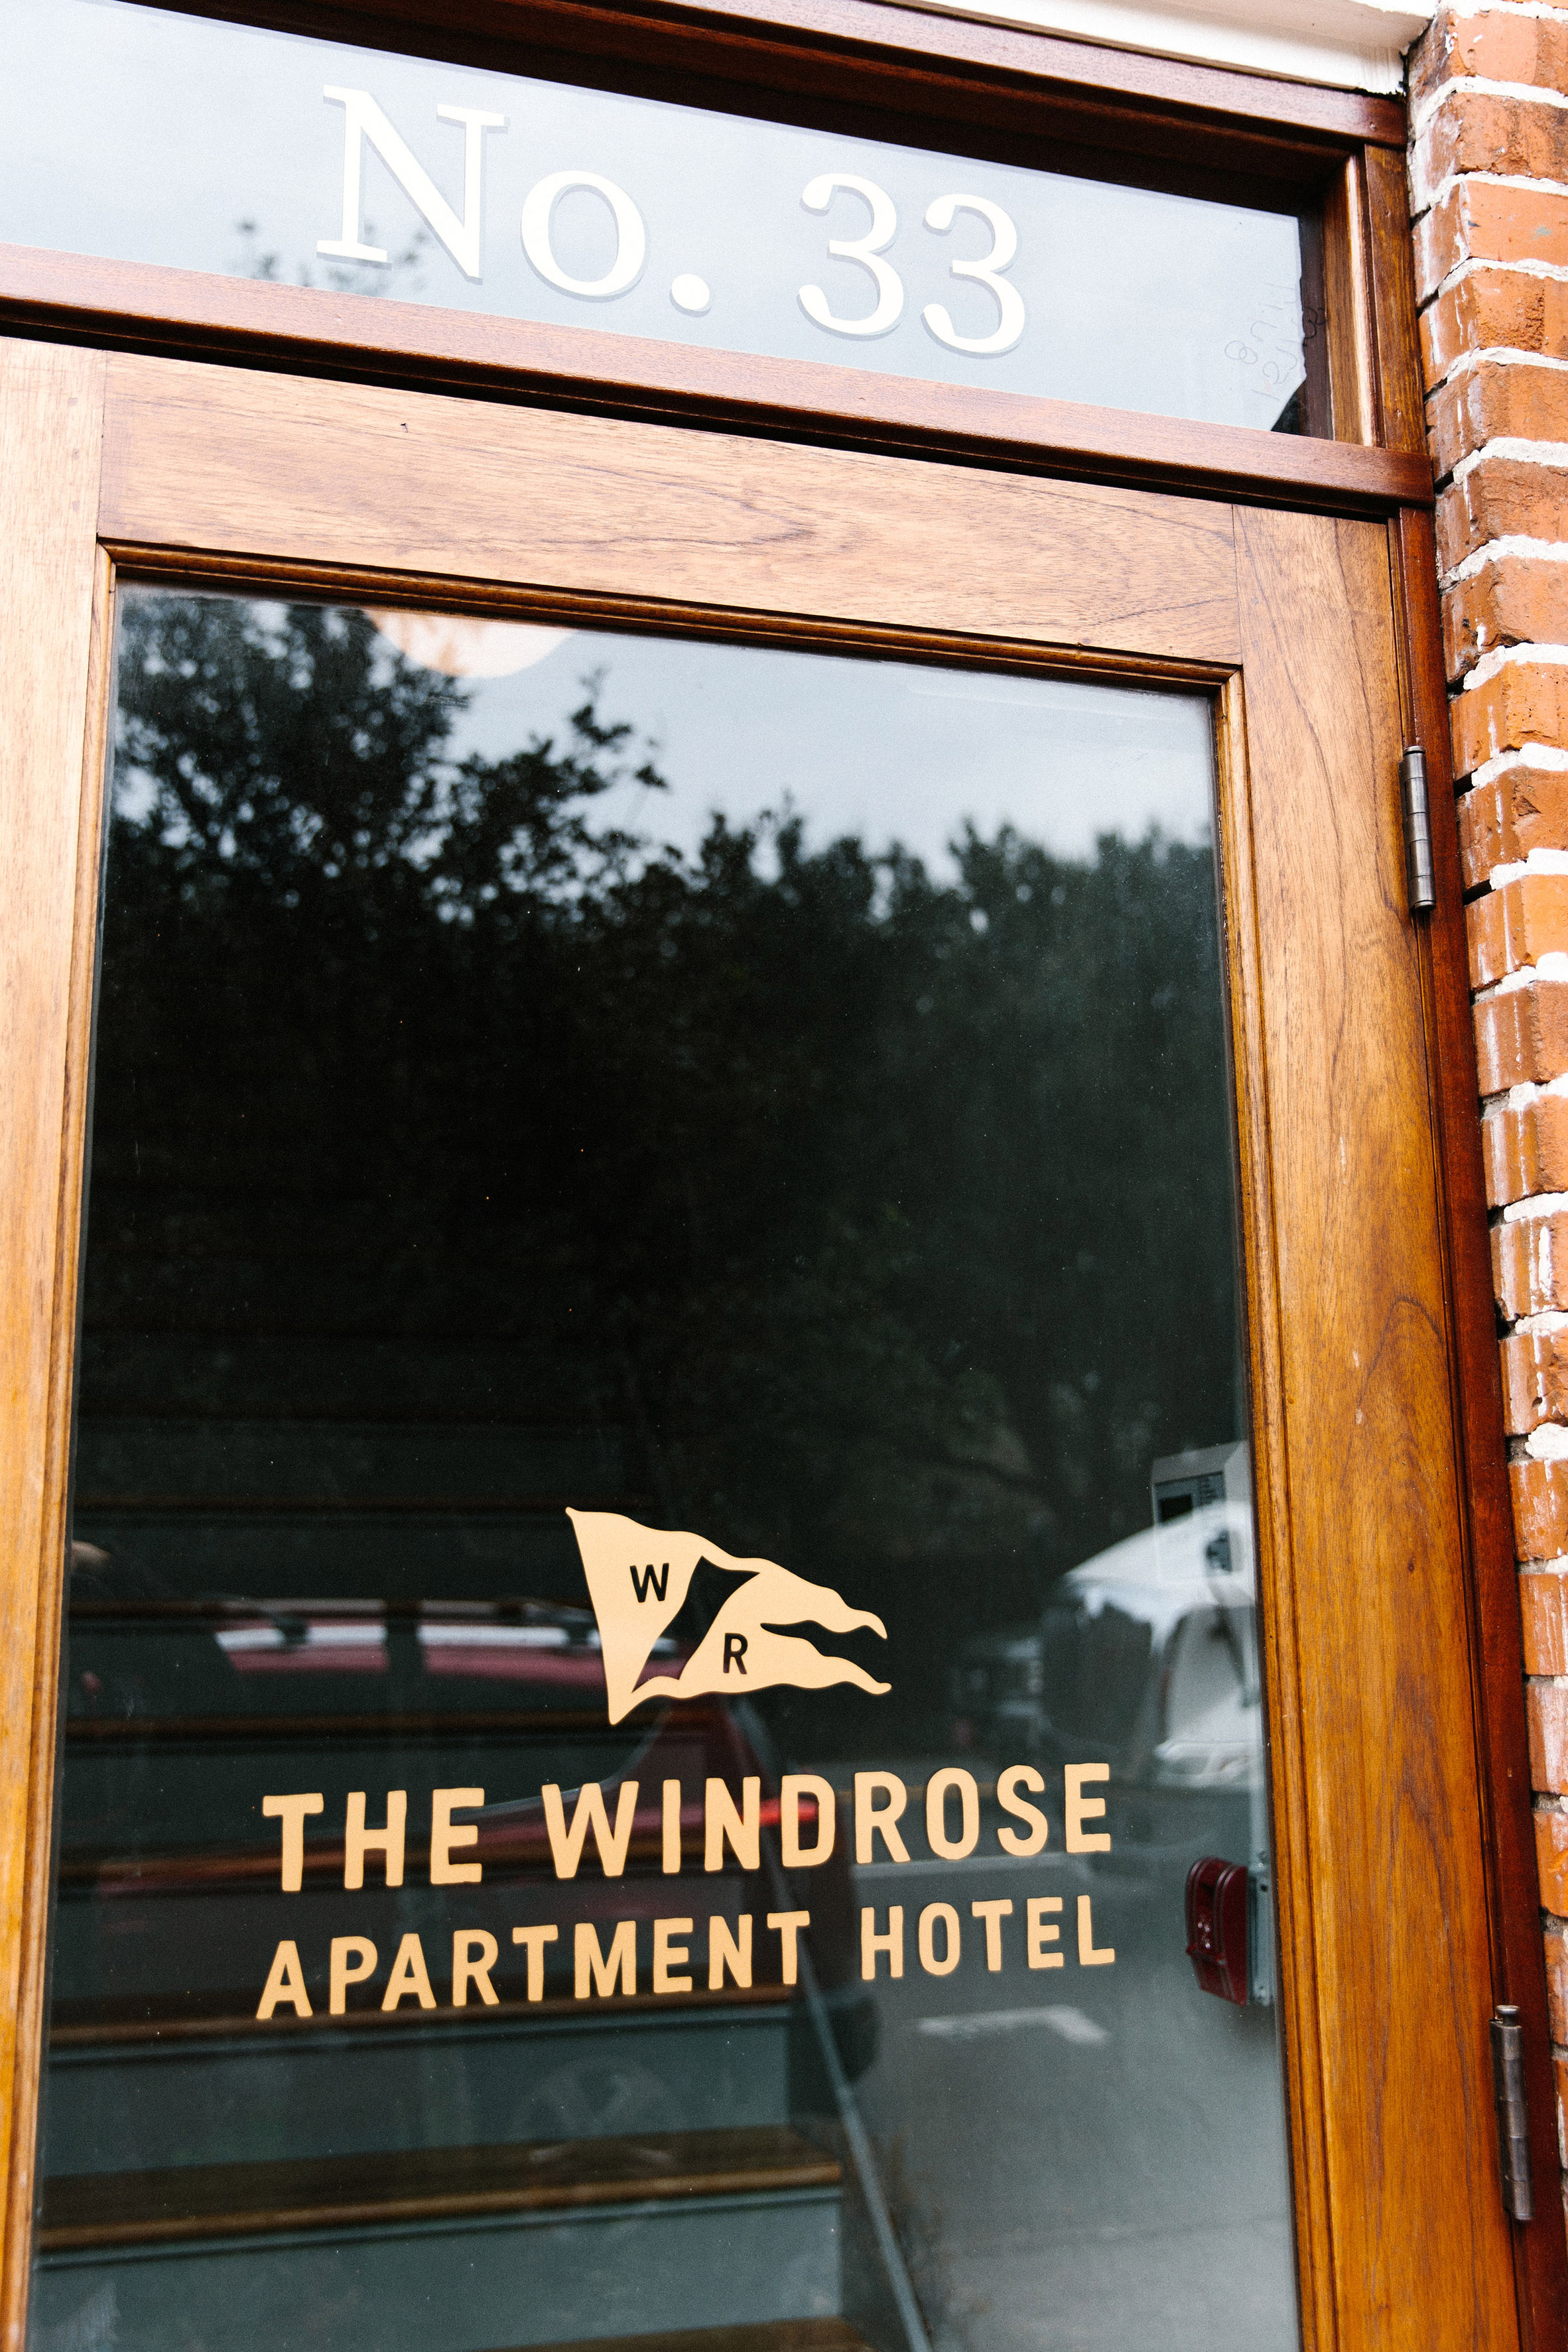 The Windrose hotel by Basic Projects